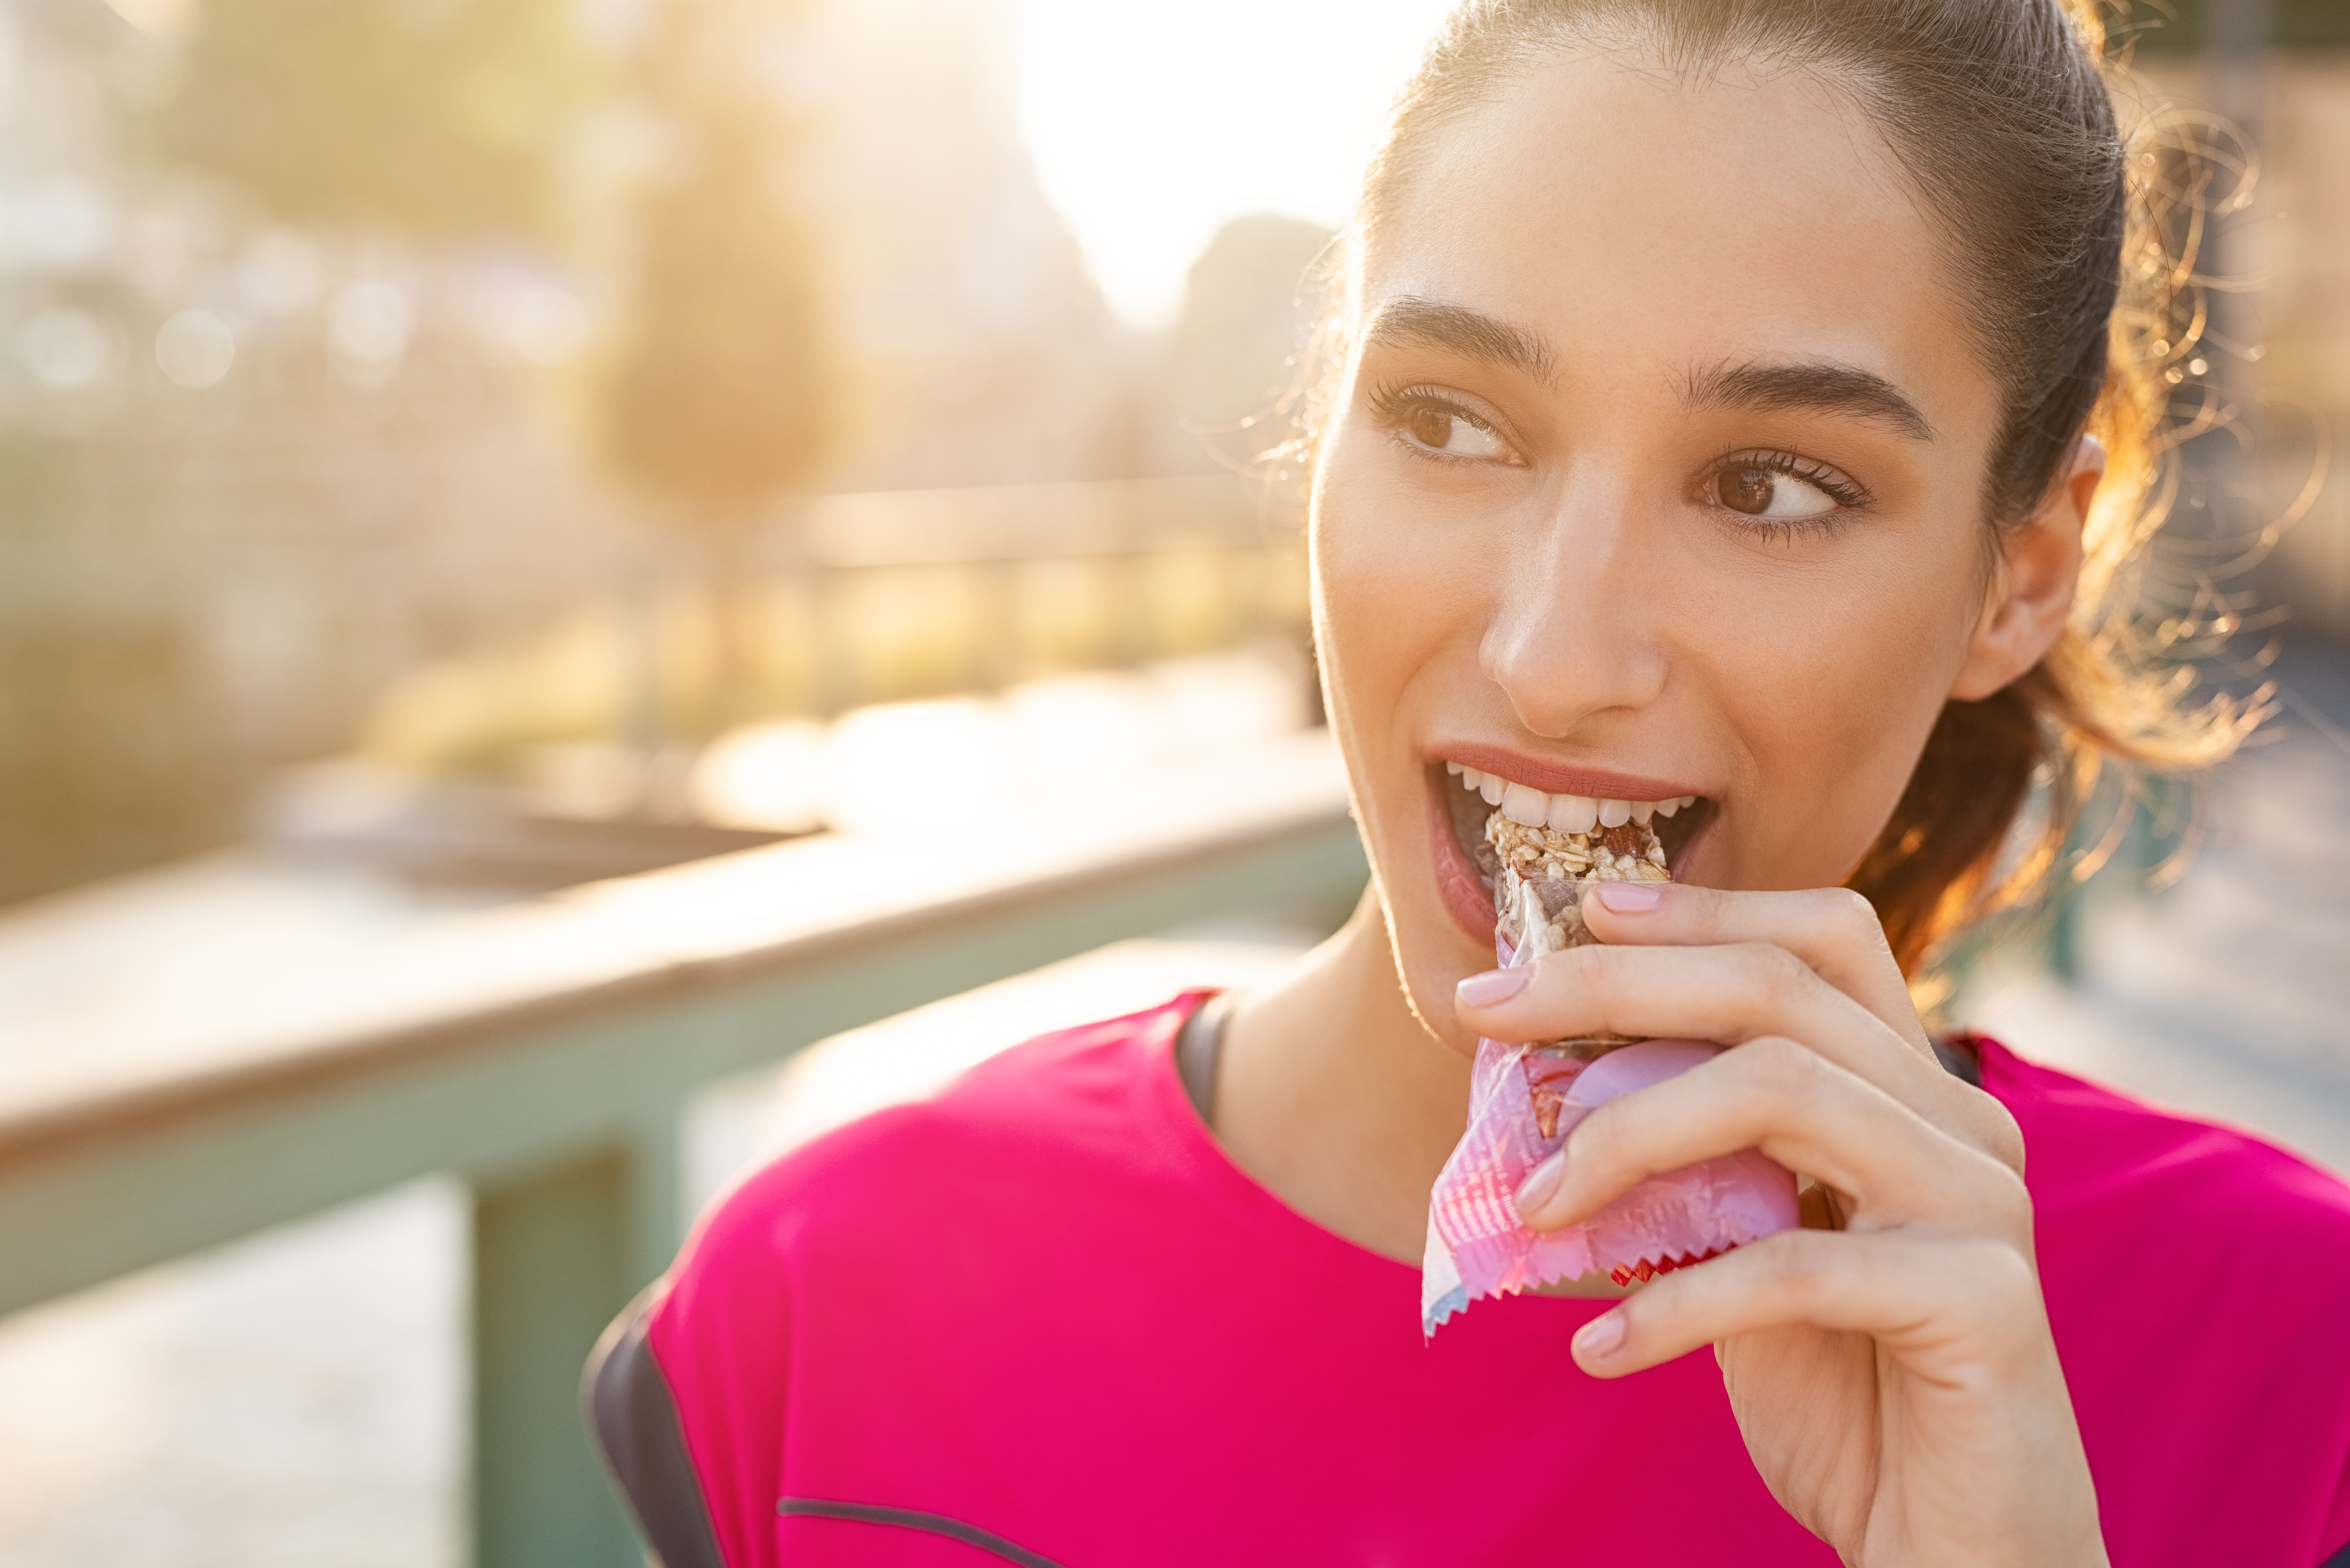 An athletic woman in a pink top eats a bar mid-run; what GMOs can be in the bar? What are the GMO facts and fiction?